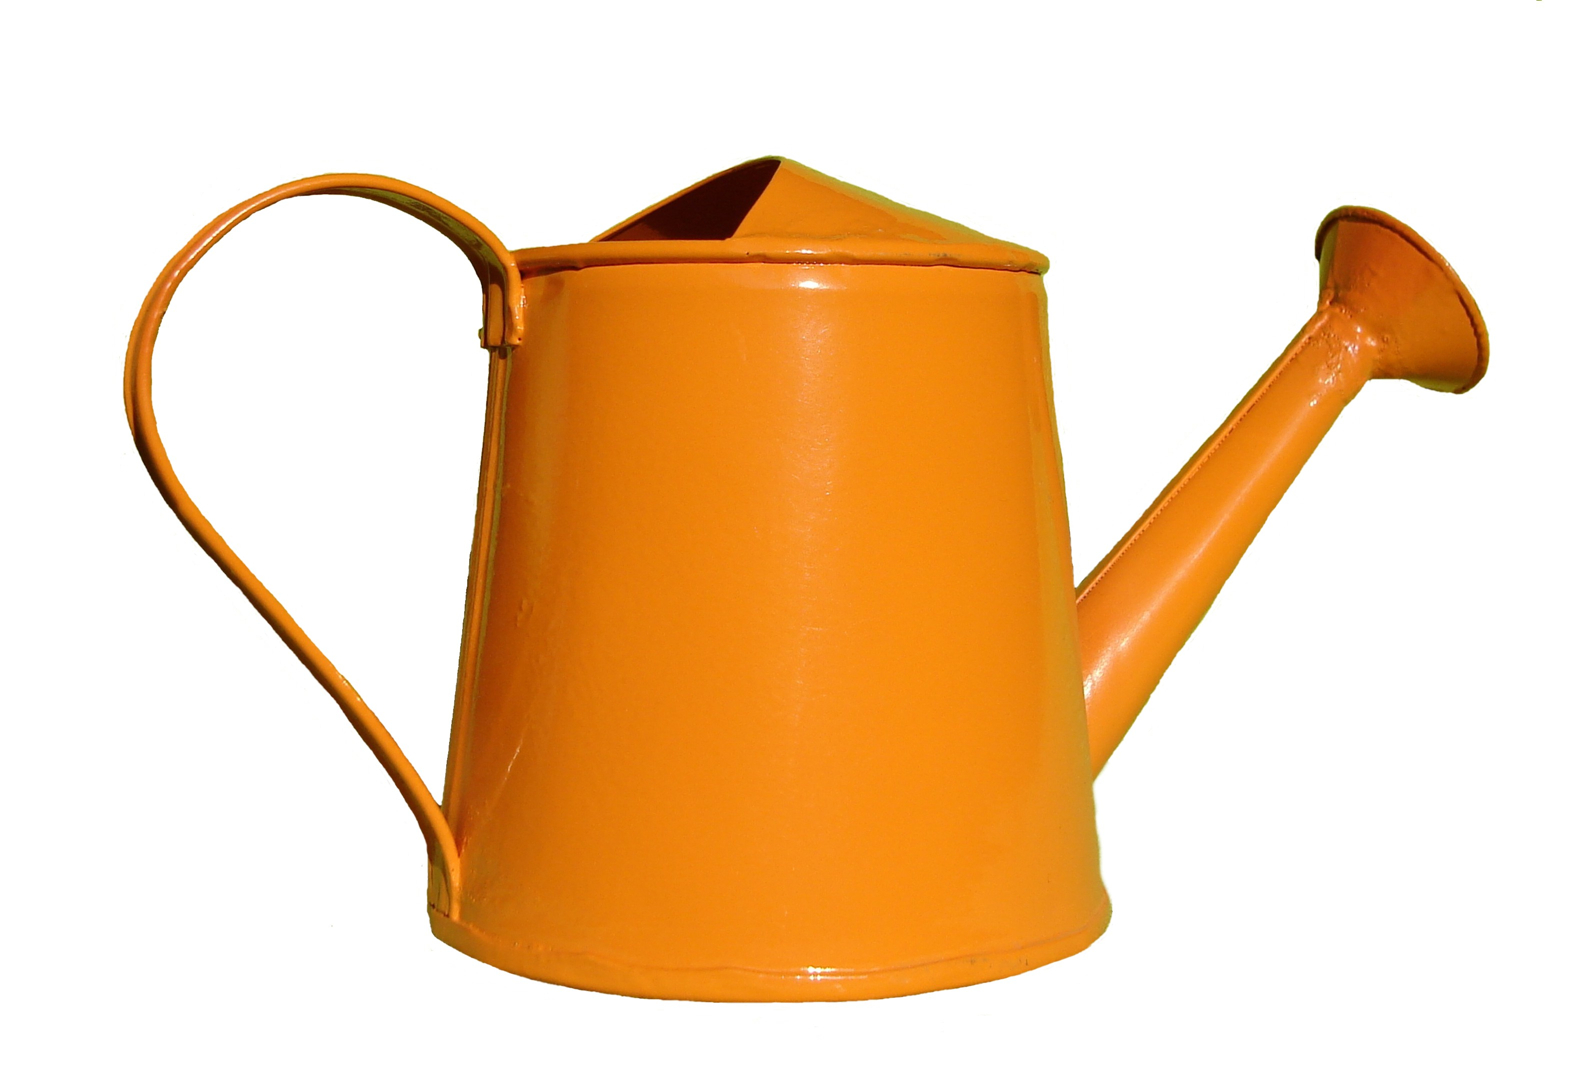 Watering Can Clip Art - Free Clipart Images